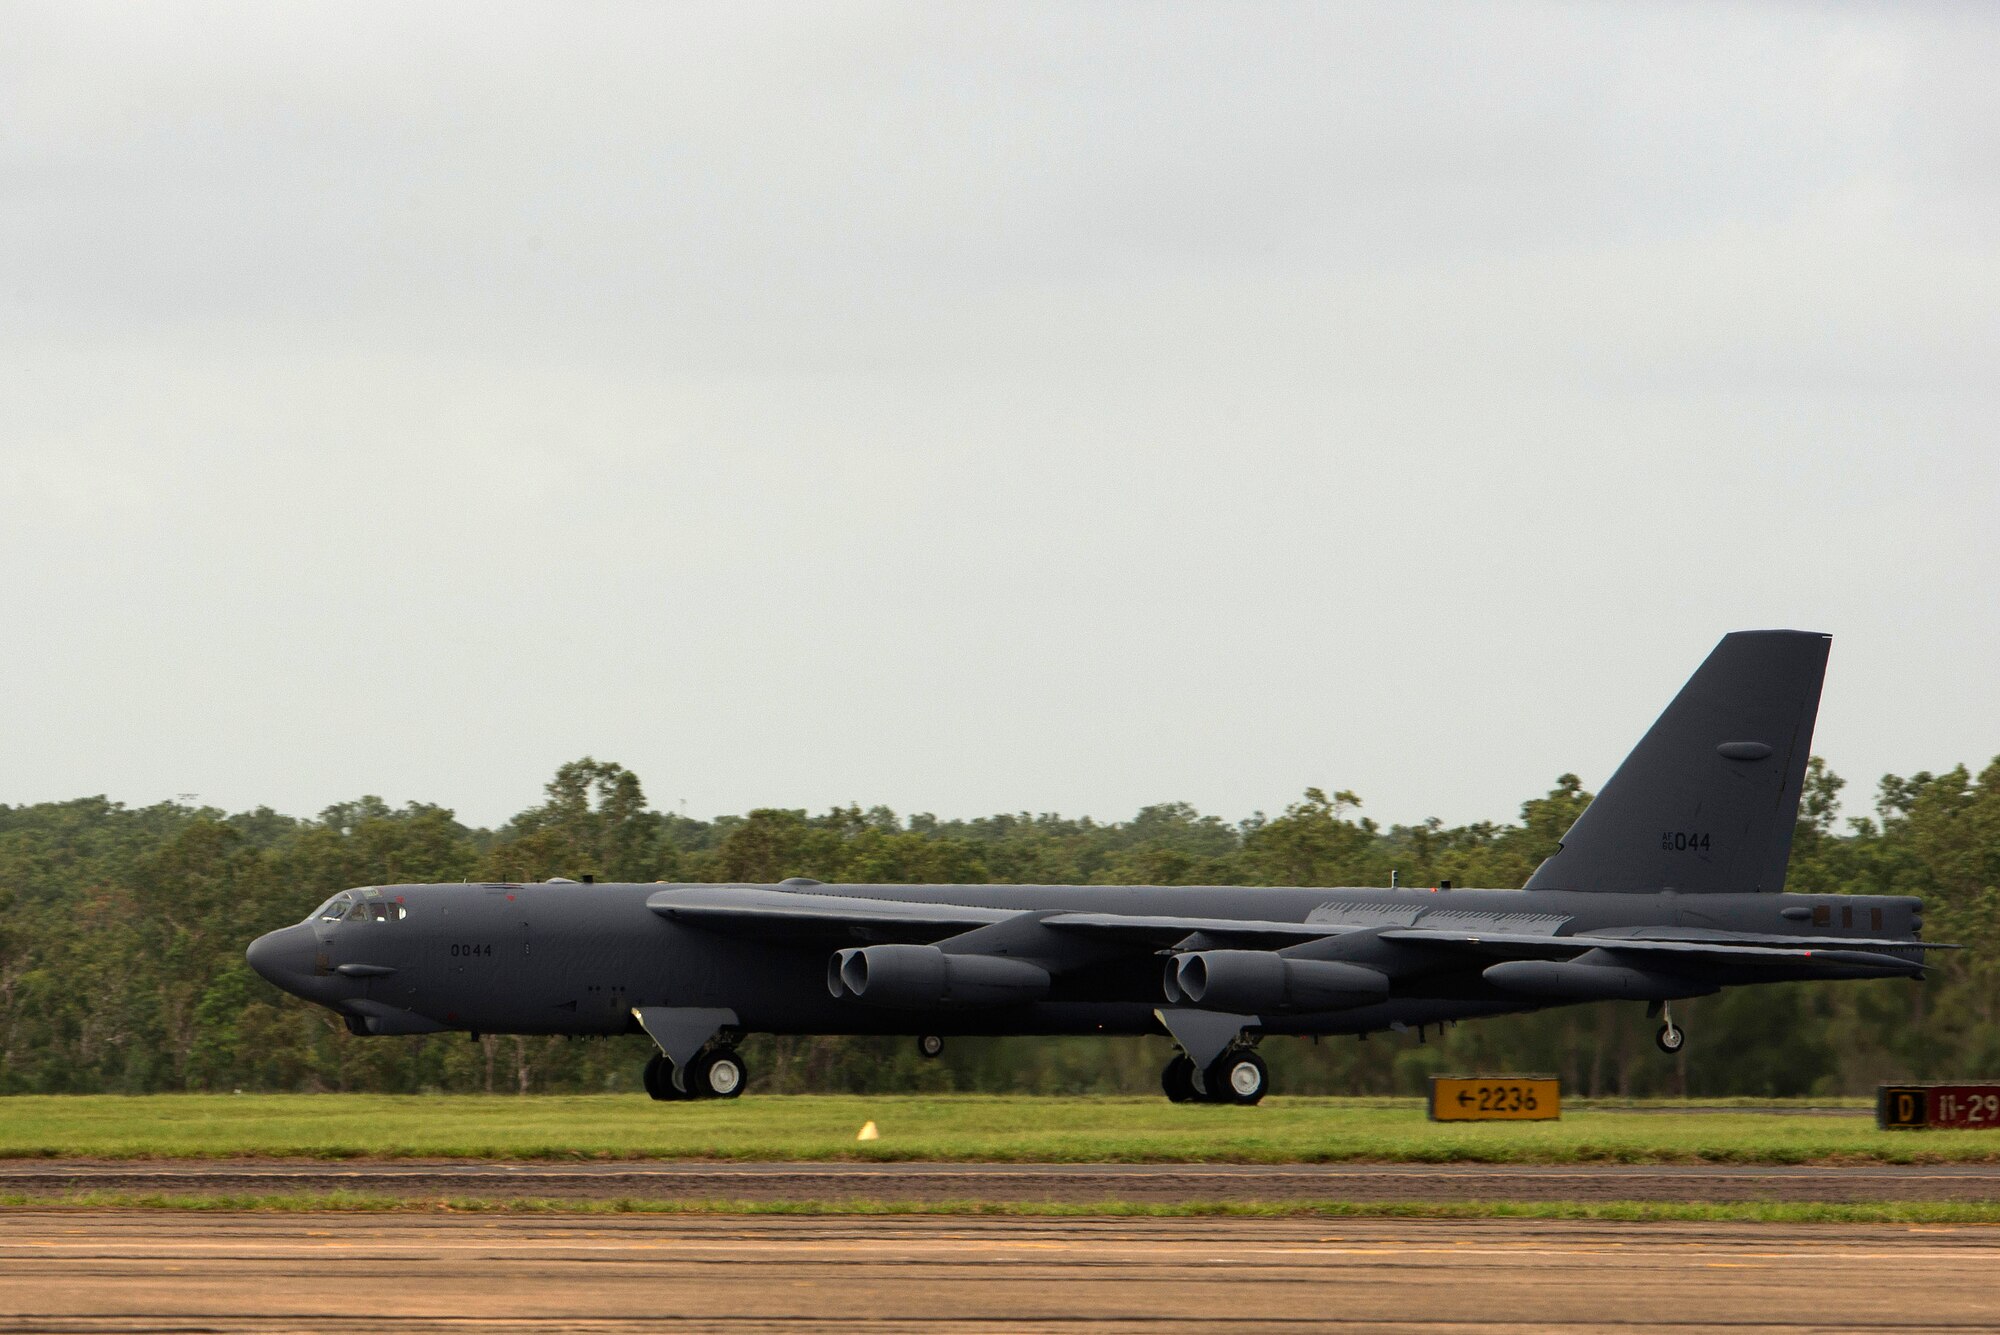 A U.S. Air Force B-52 Stratofortress taxis on the runway upon returning from a sortie in support of Diamond Shield 2019 (DS-19) at Royal Australian Air Force Base Darwin, Australia, March 26, 2019.